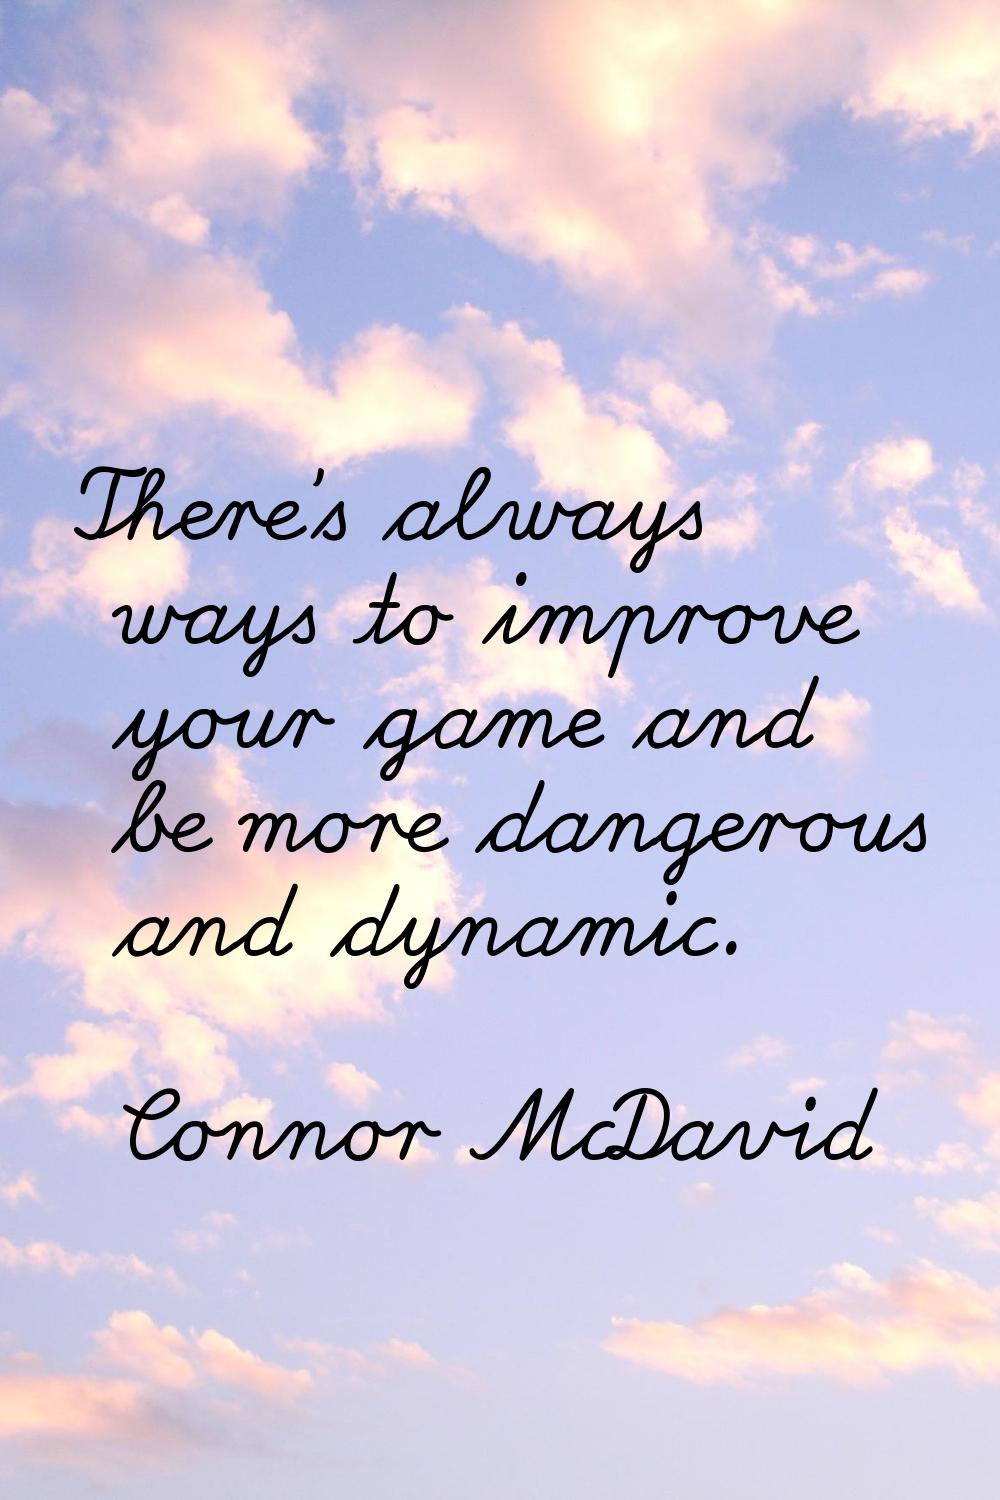 There's always ways to improve your game and be more dangerous and dynamic.